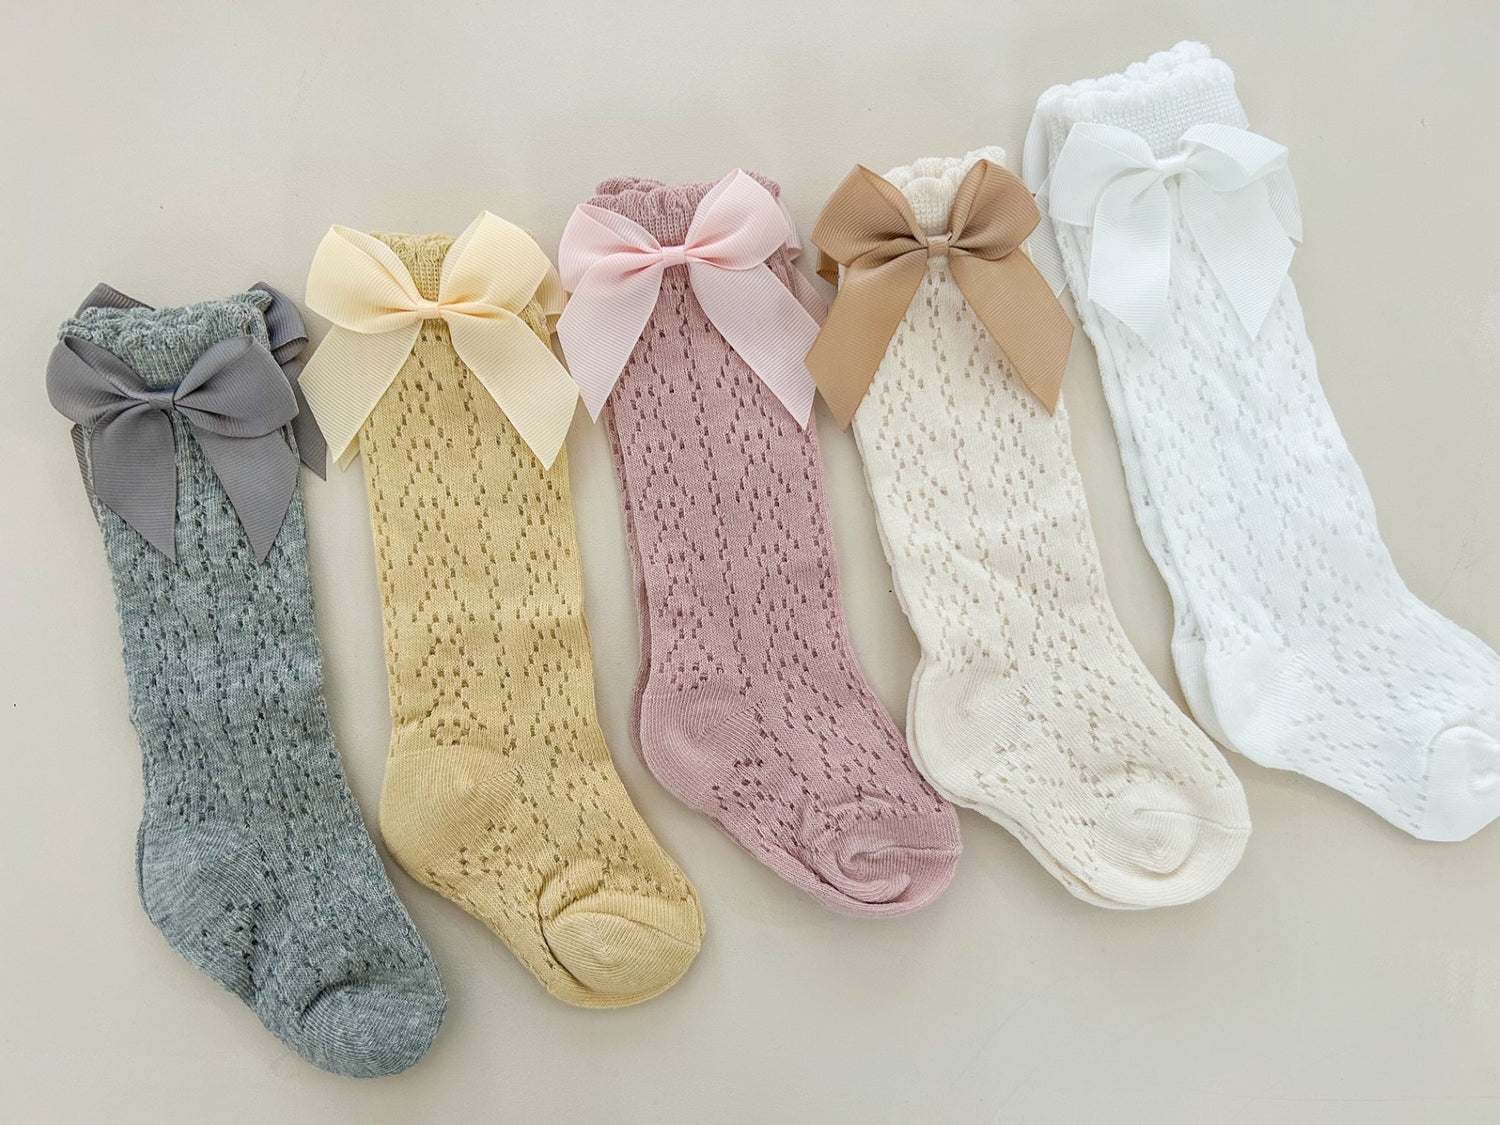 OPENWORK EXTRA LONG LACE BOW SOCKS